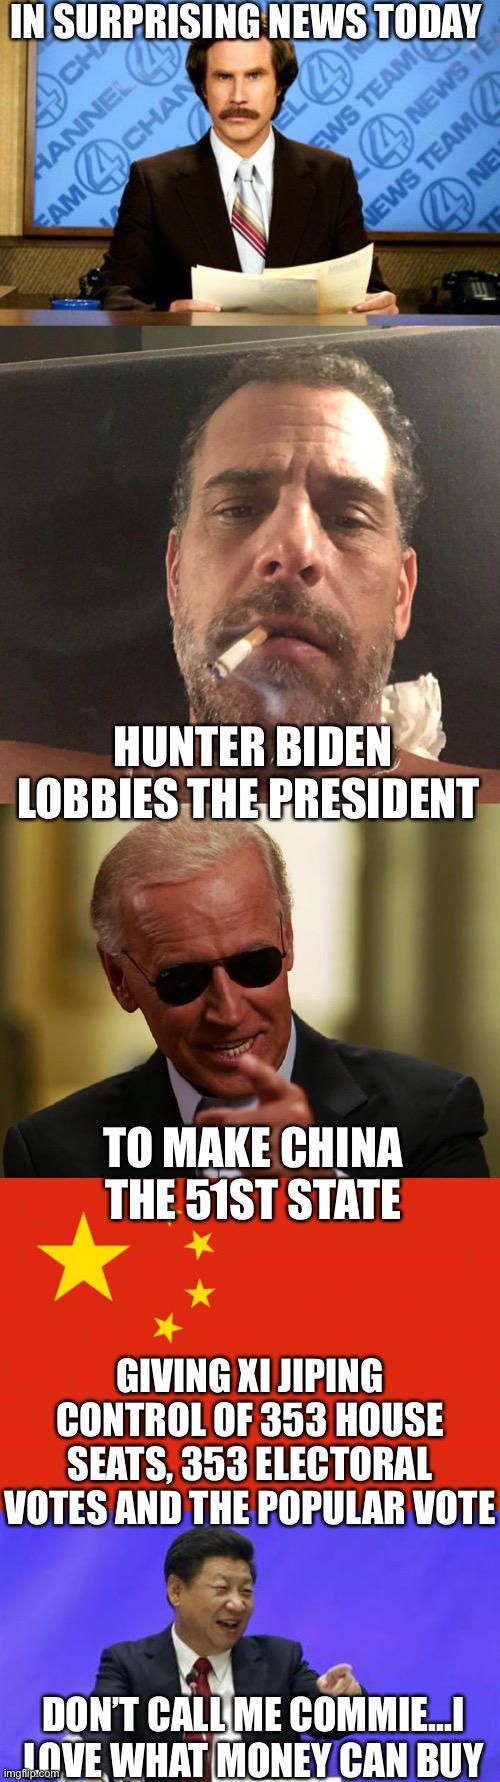 Oh snap! | IN SURPRISING NEWS TODAY; HUNTER BIDEN LOBBIES THE PRESIDENT; TO MAKE CHINA THE 51ST STATE; GIVING XI JIPING CONTROL OF 353 HOUSE SEATS, 353 ELECTORAL VOTES AND THE POPULAR VOTE; DON’T CALL ME COMMIE...I LOVE WHAT MONEY CAN BUY | image tagged in breaking news,hunter biden,cool joe biden,china flag,xi jinping laughing | made w/ Imgflip meme maker